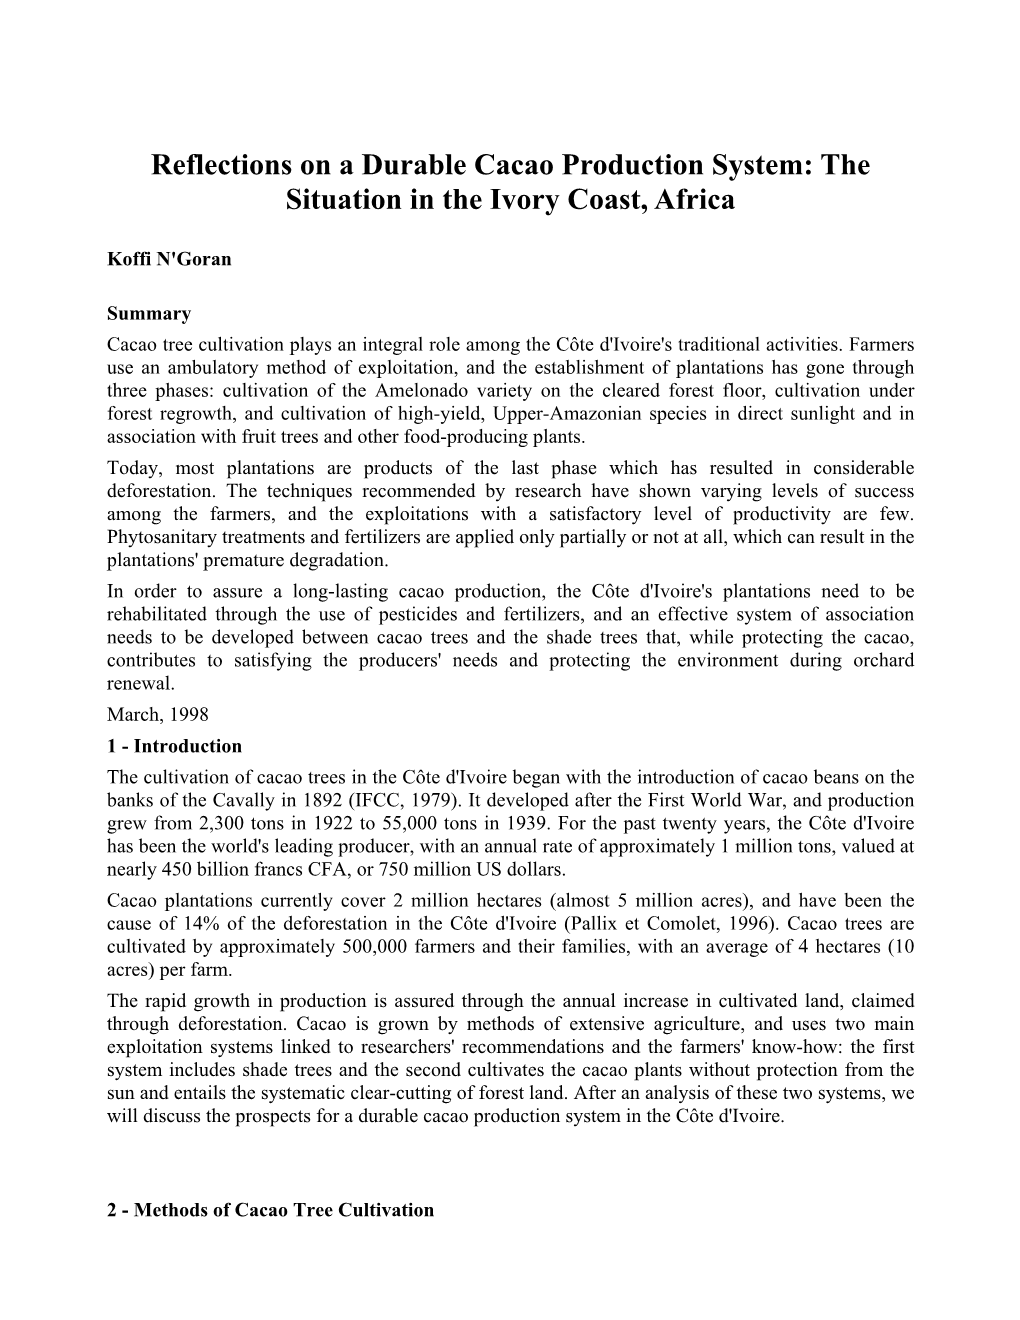 Reflections on a Durable Cacao Production System: the Situation in the Ivory Coast, Africa